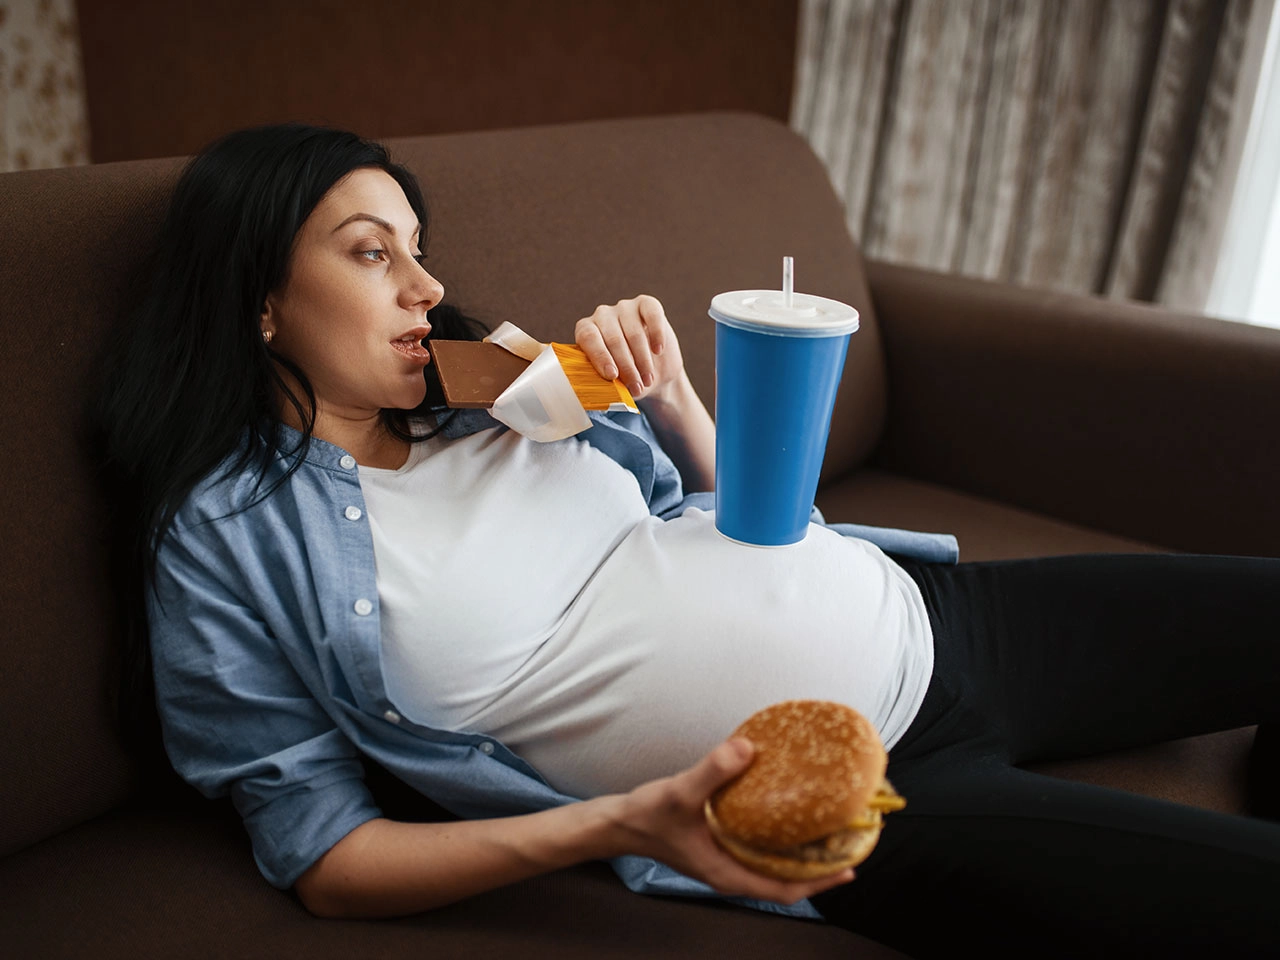 Eat-Junk-Foods-While-Pregnant